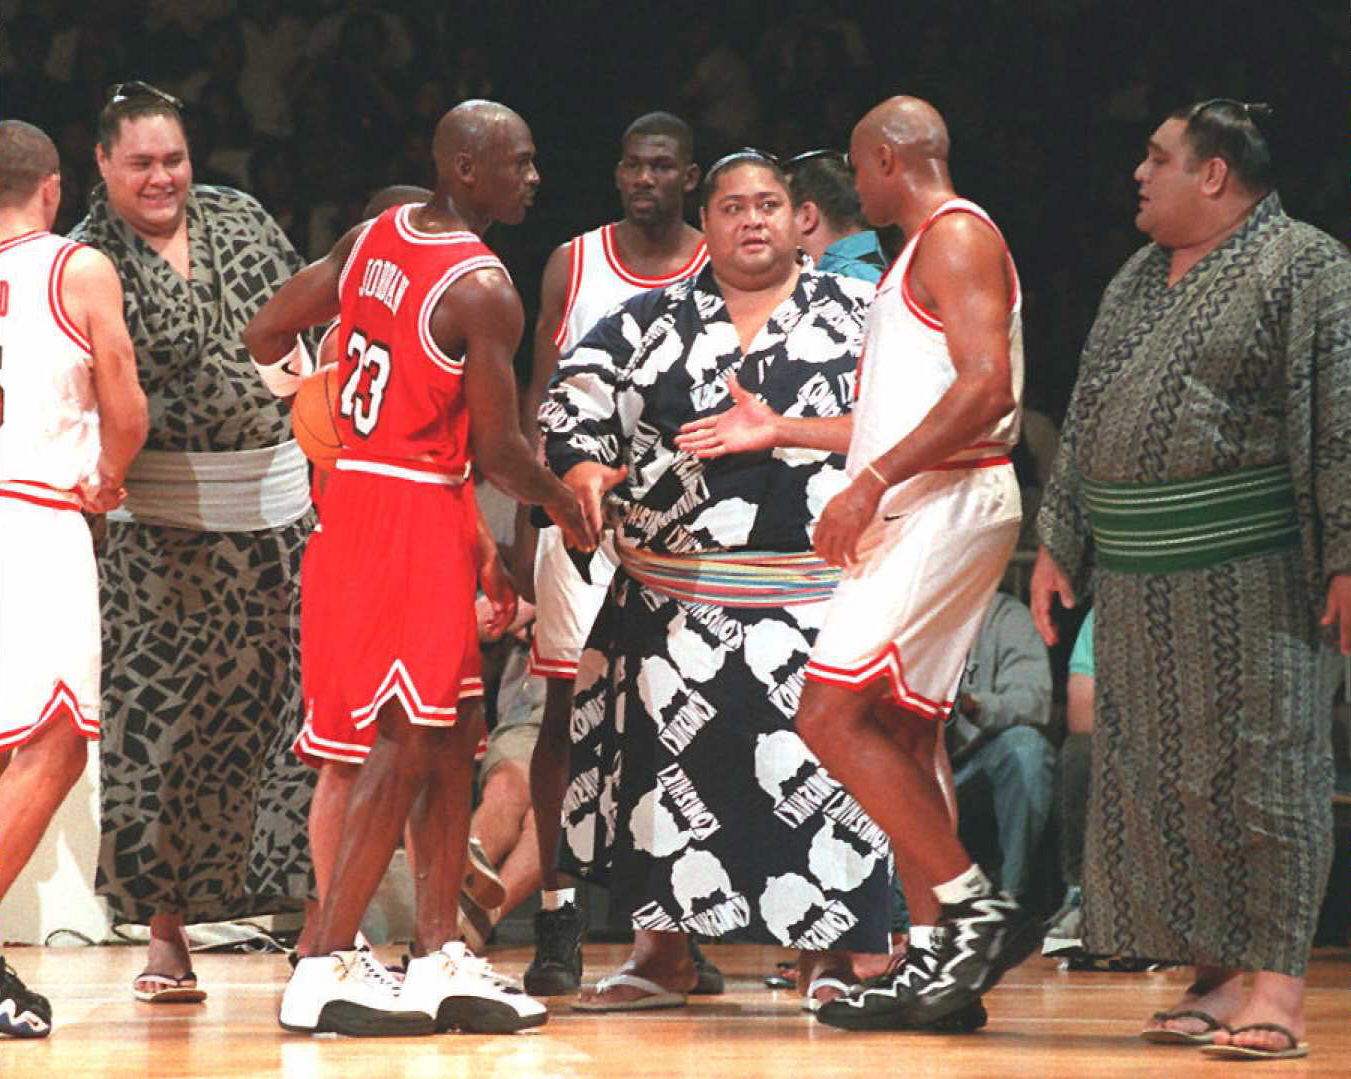 Bulls legend Michael Jordan and Hall of Fame forward Charles Barkley shake hands after an exhibition game in Japan